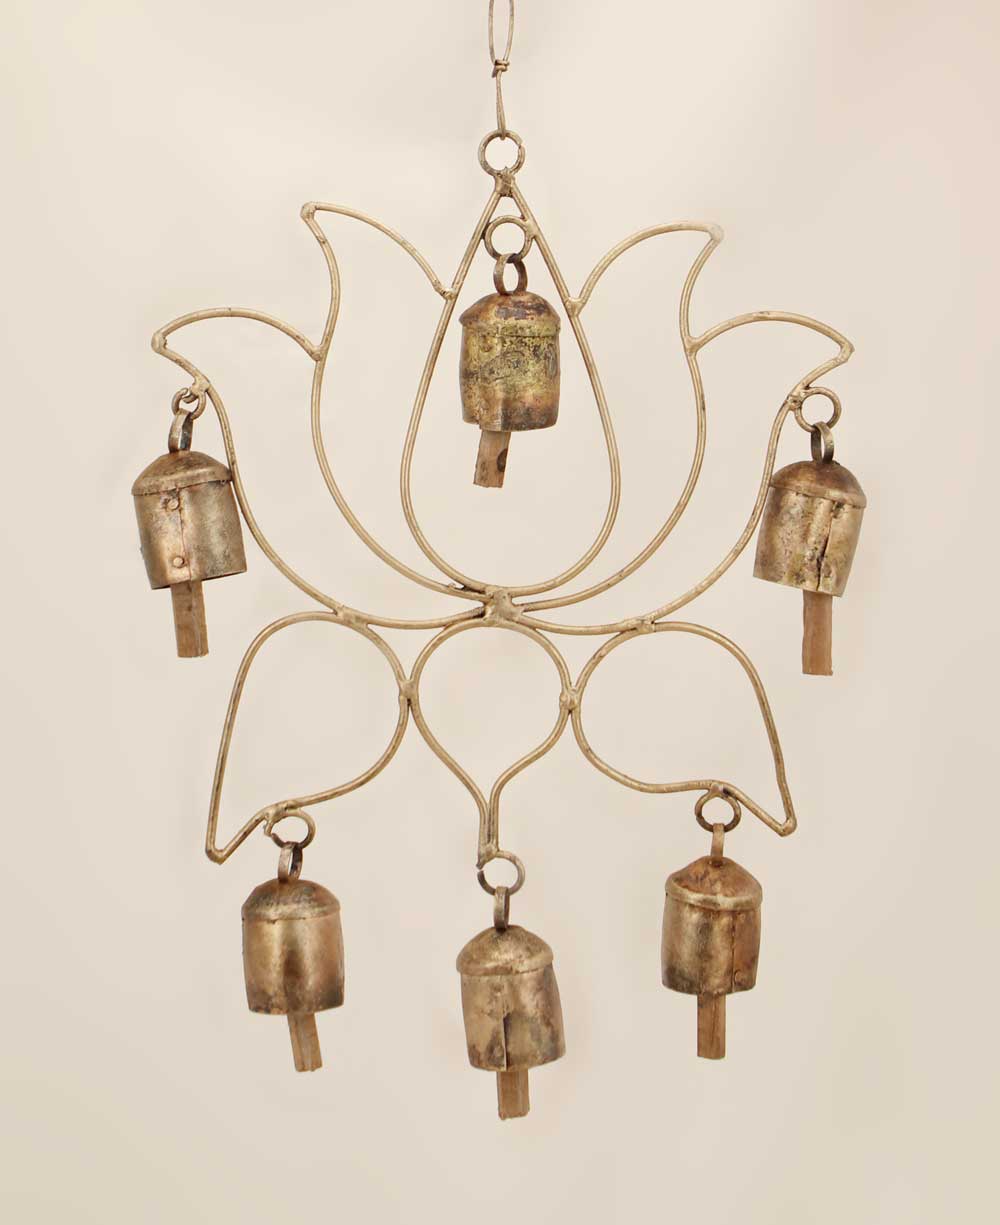 Fairtrade Lotus Bell Chime - Wind Chimes